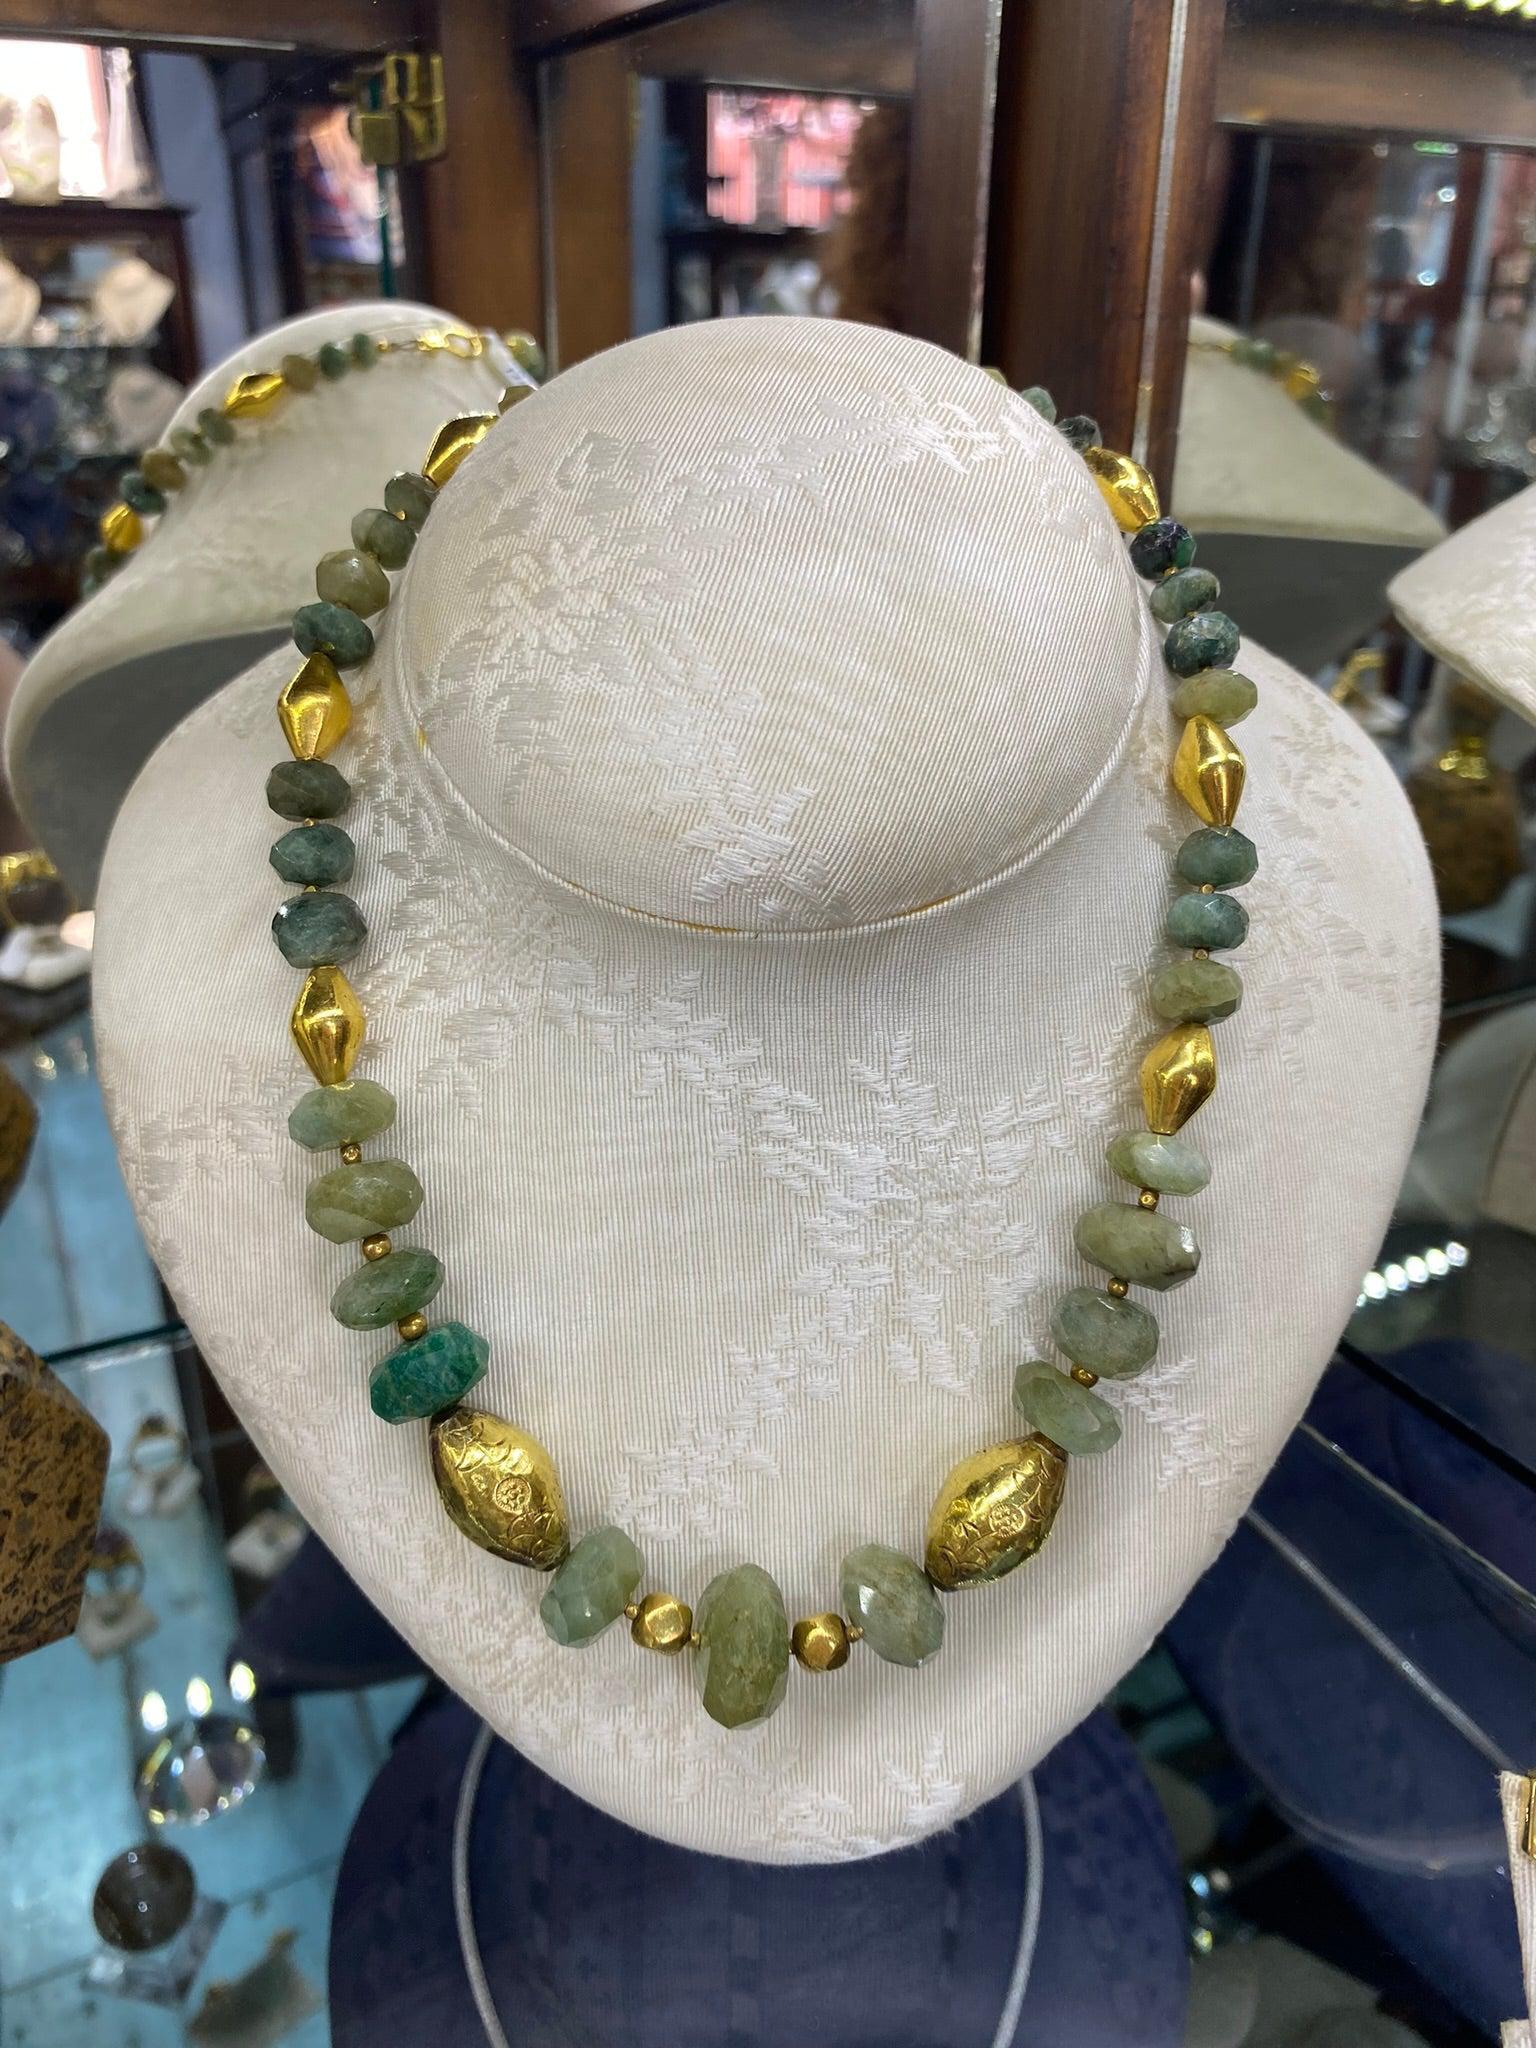 Necklace in 22k Gold with Raw Emerald stones